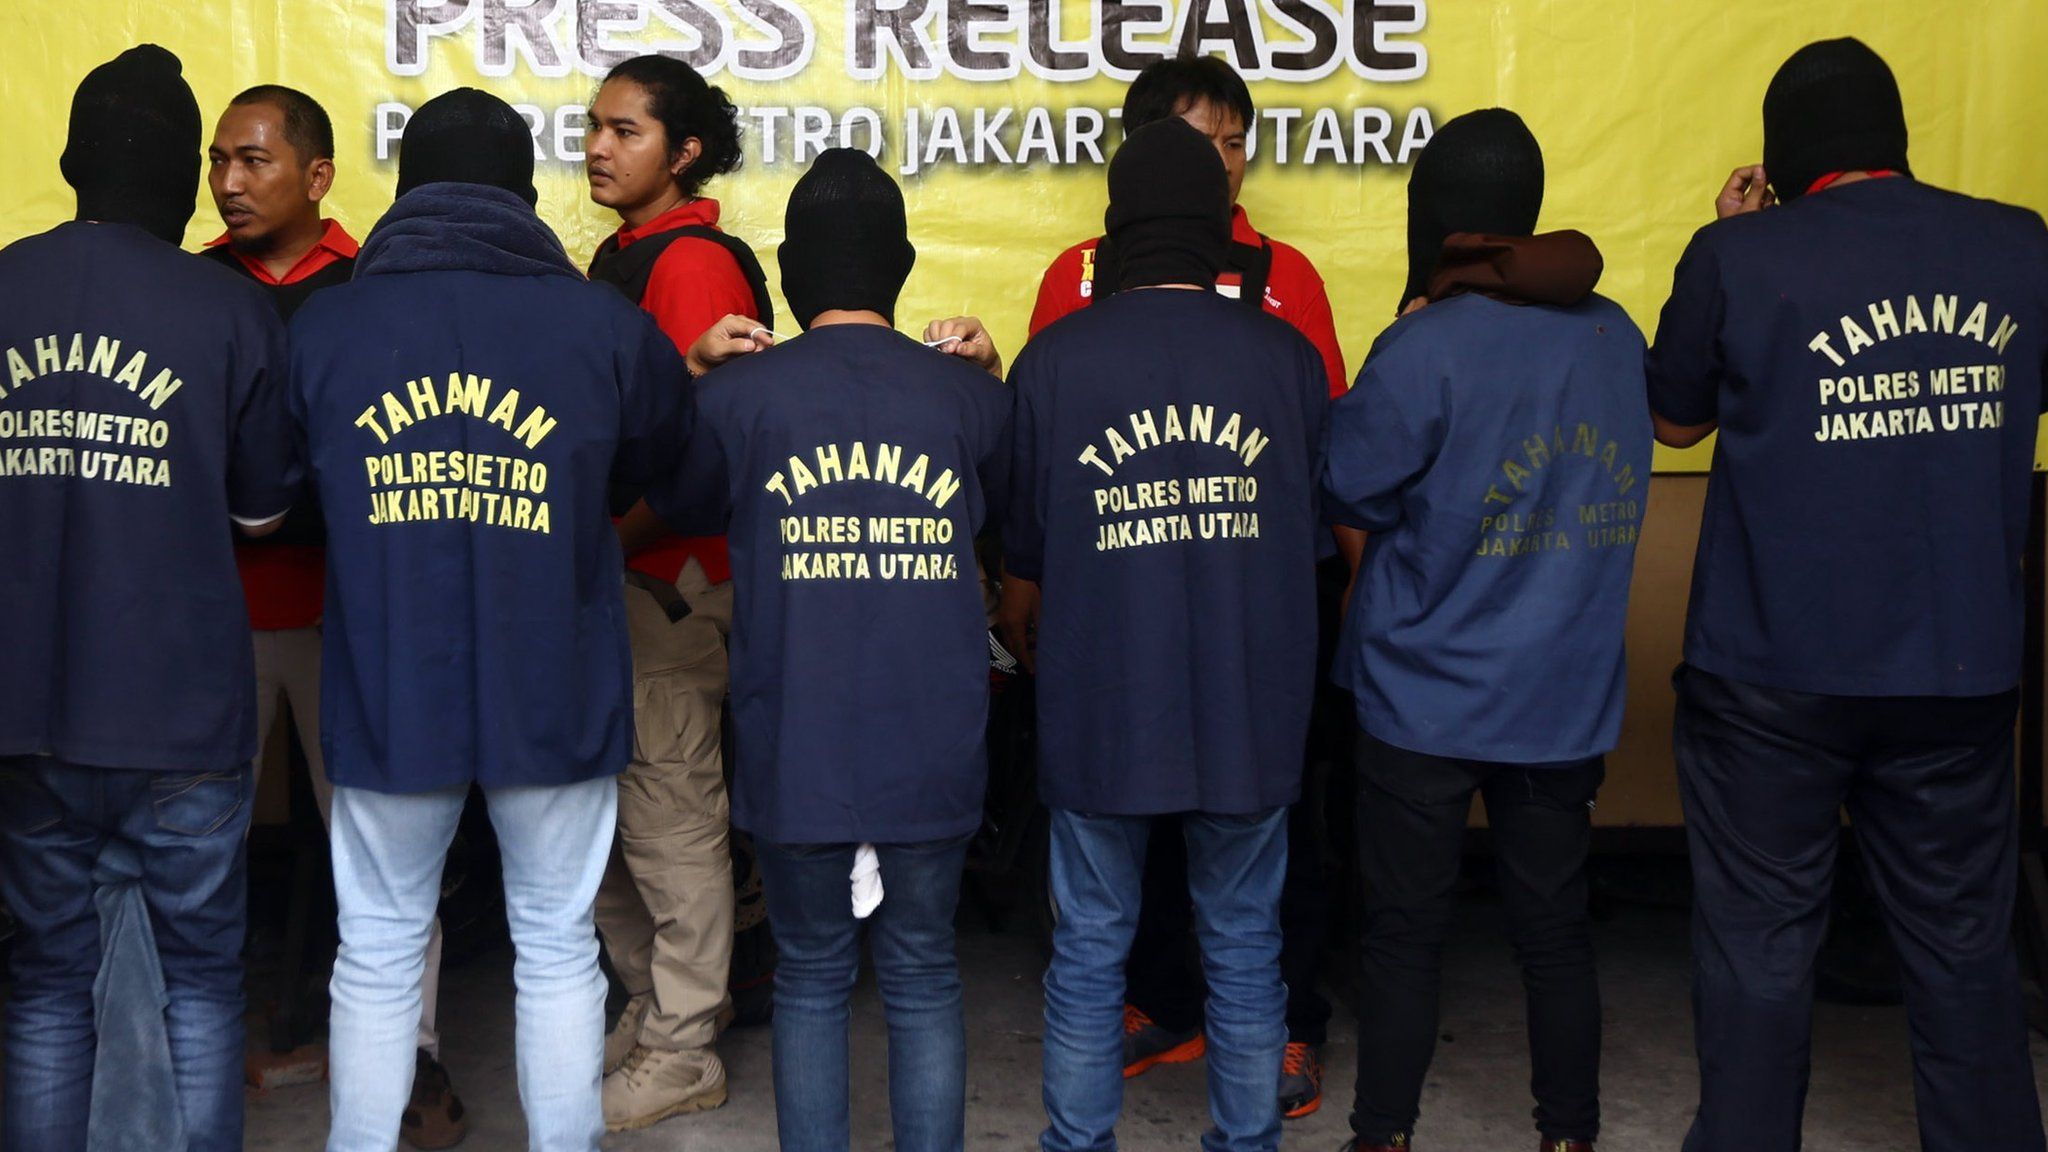 Indonesian police officers stand guard as men arrested in a raid are shown to the media during a press conference at a police station in Jakarta, Indonesia, 22 May 2017